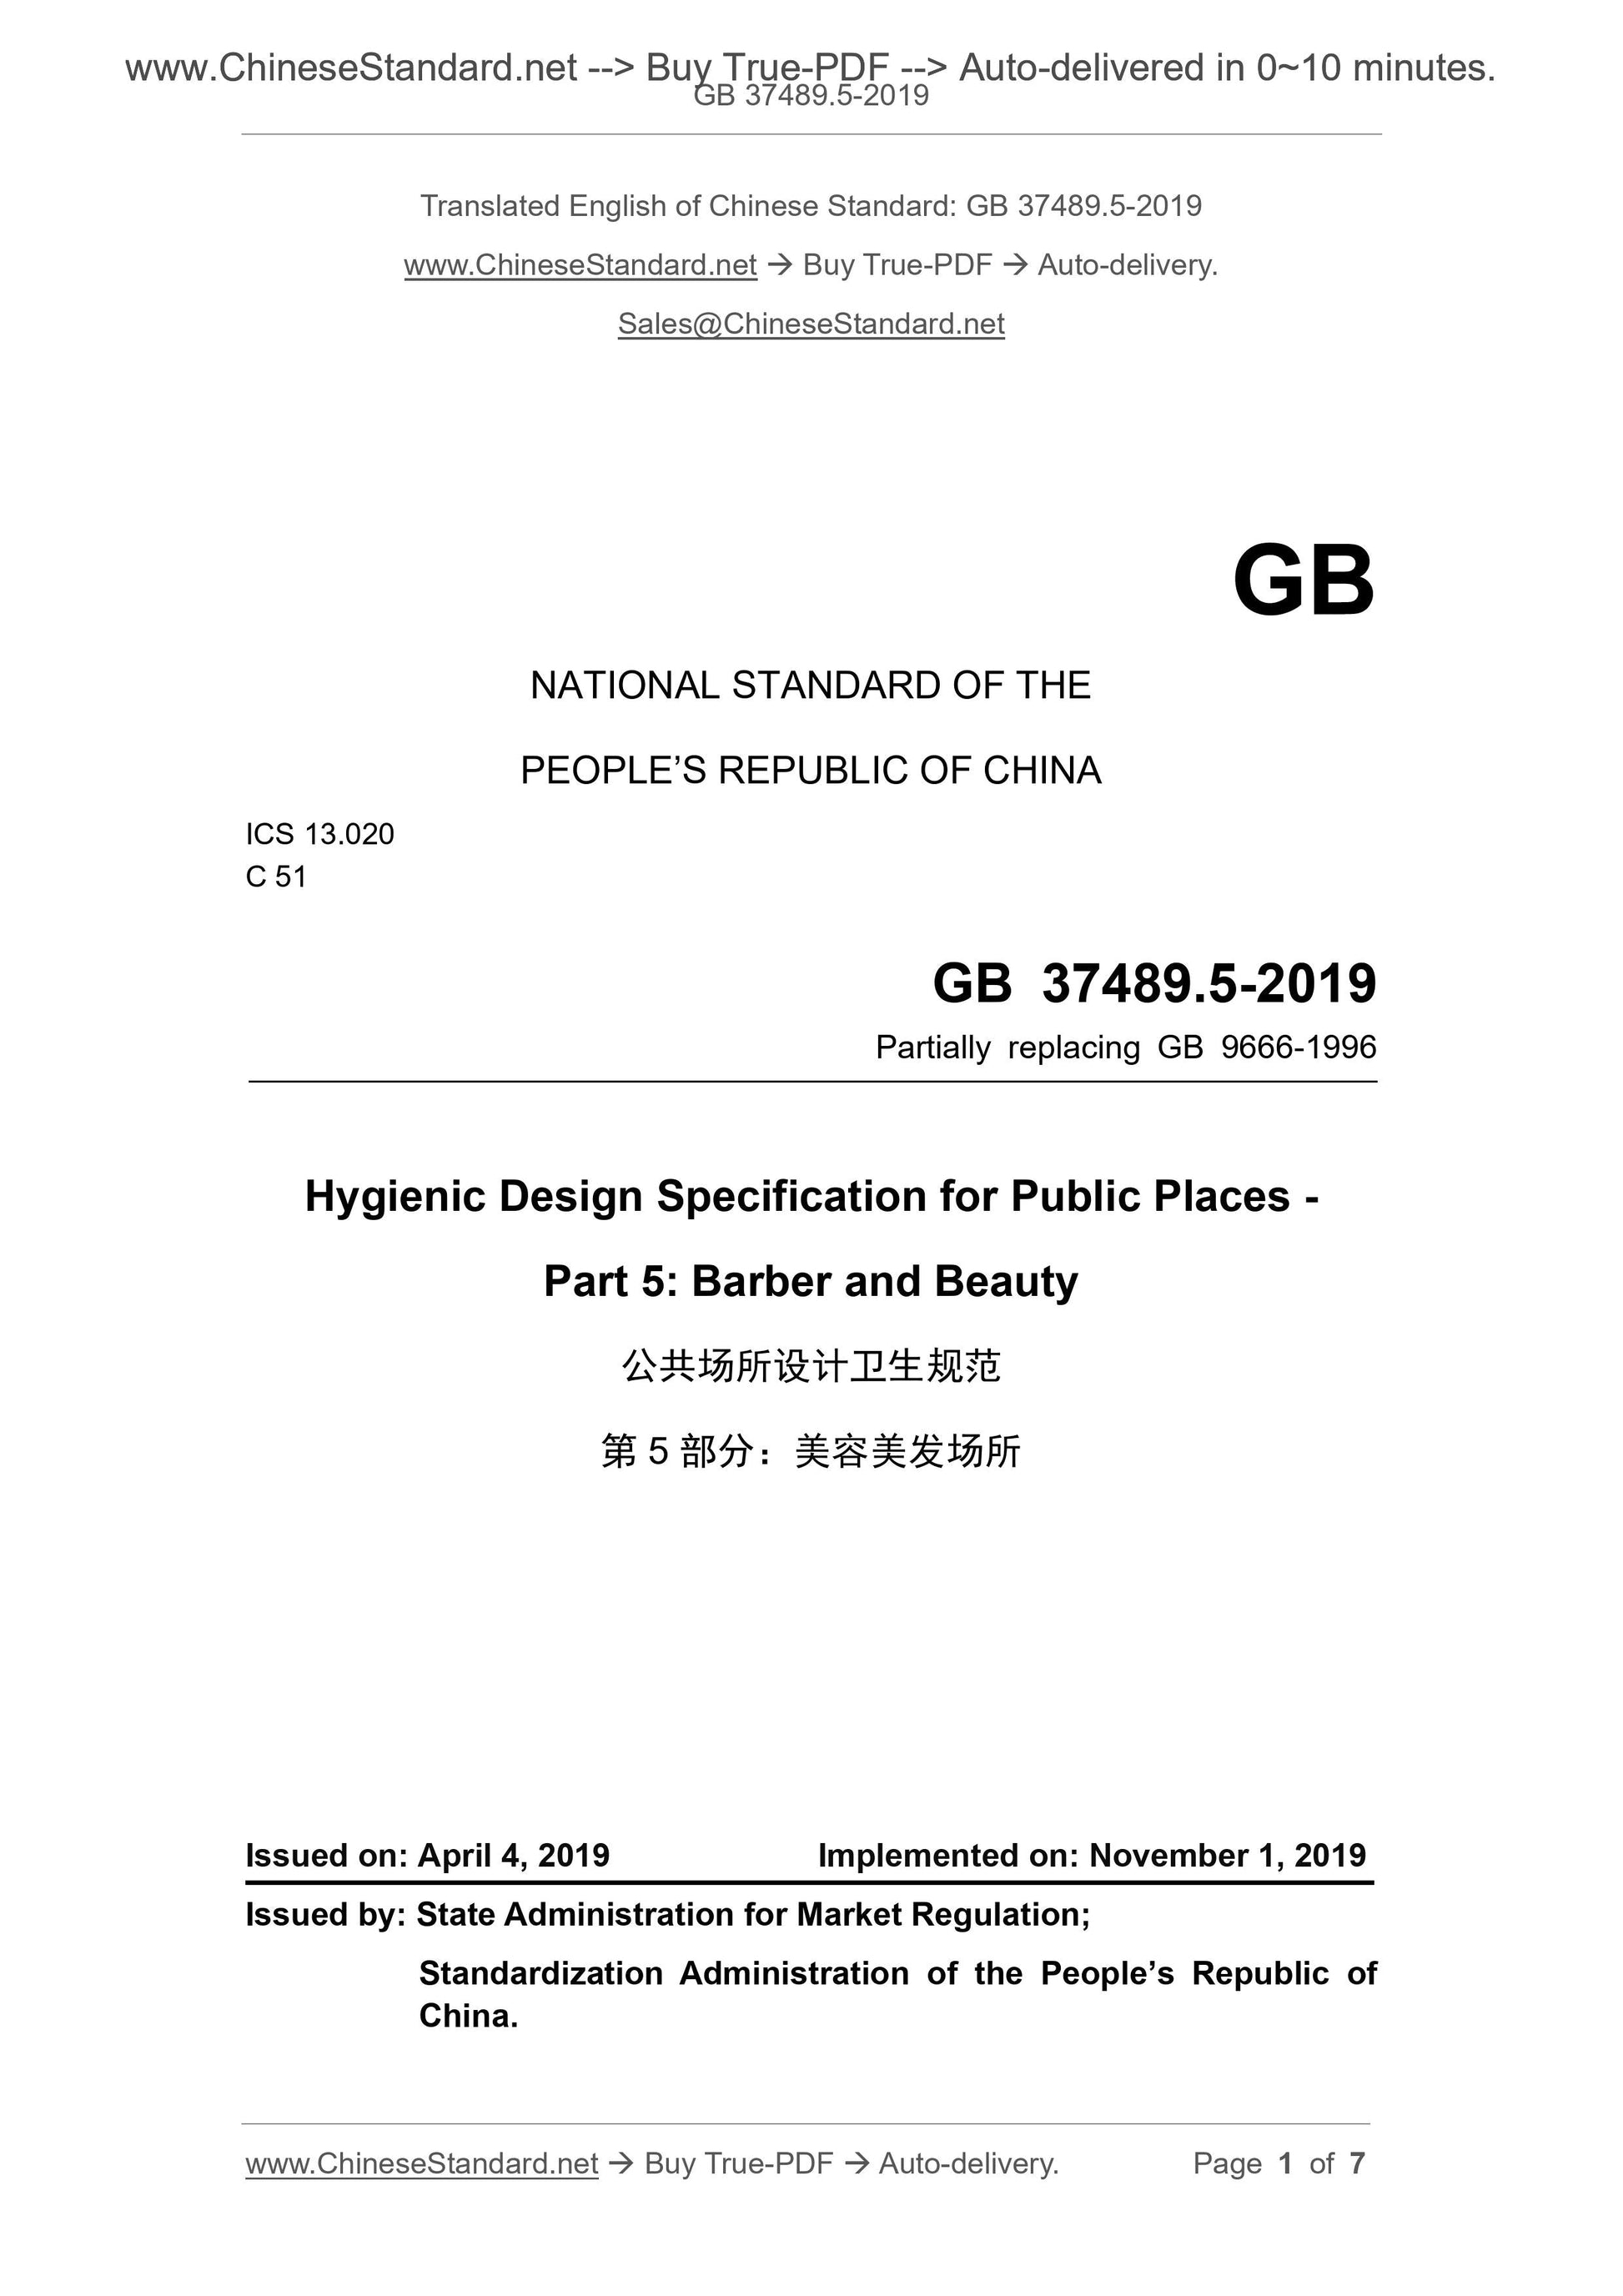 GB 37489.5-2019 Page 1